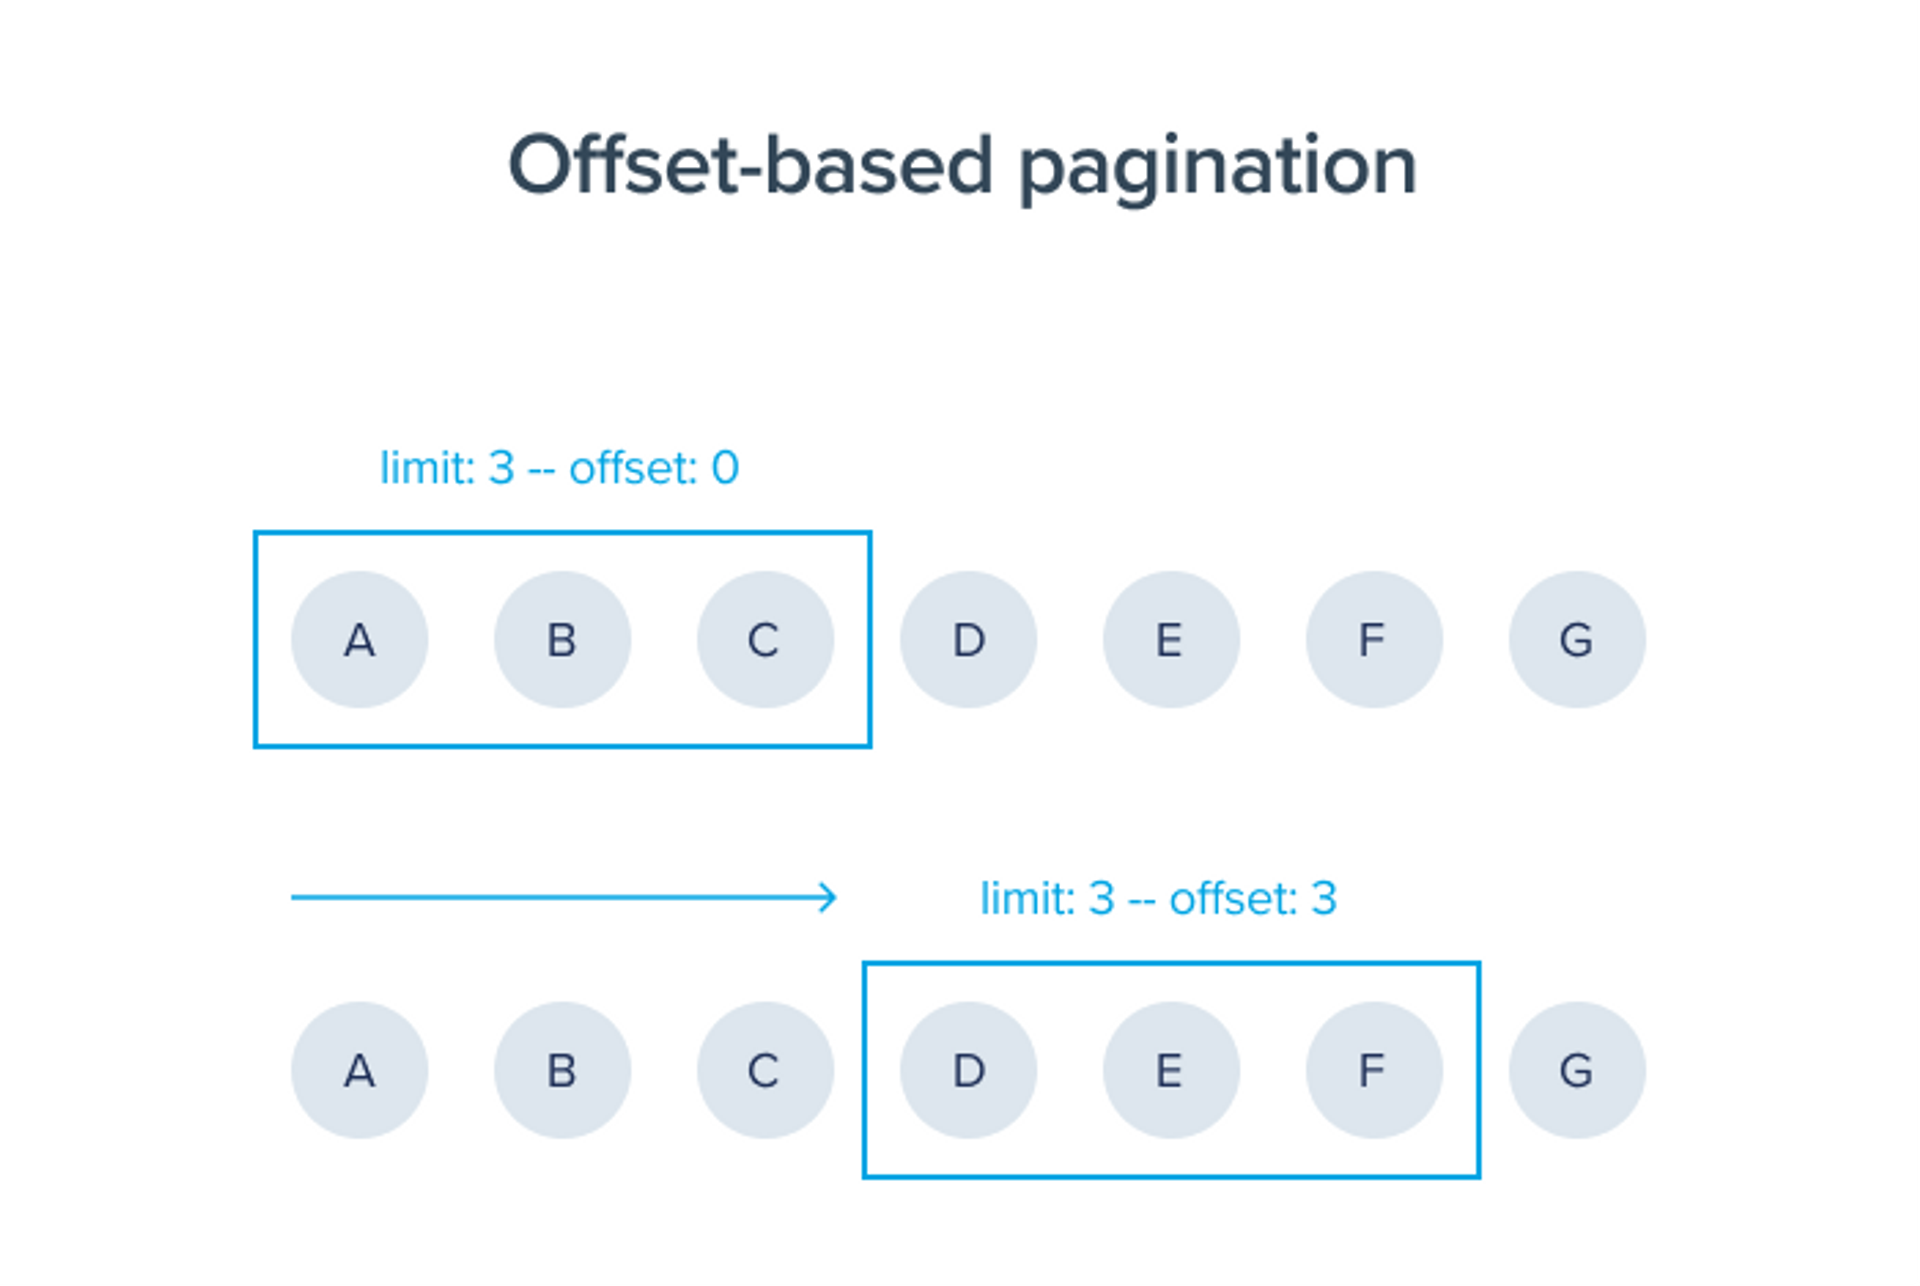 offset-based pagination illustrated